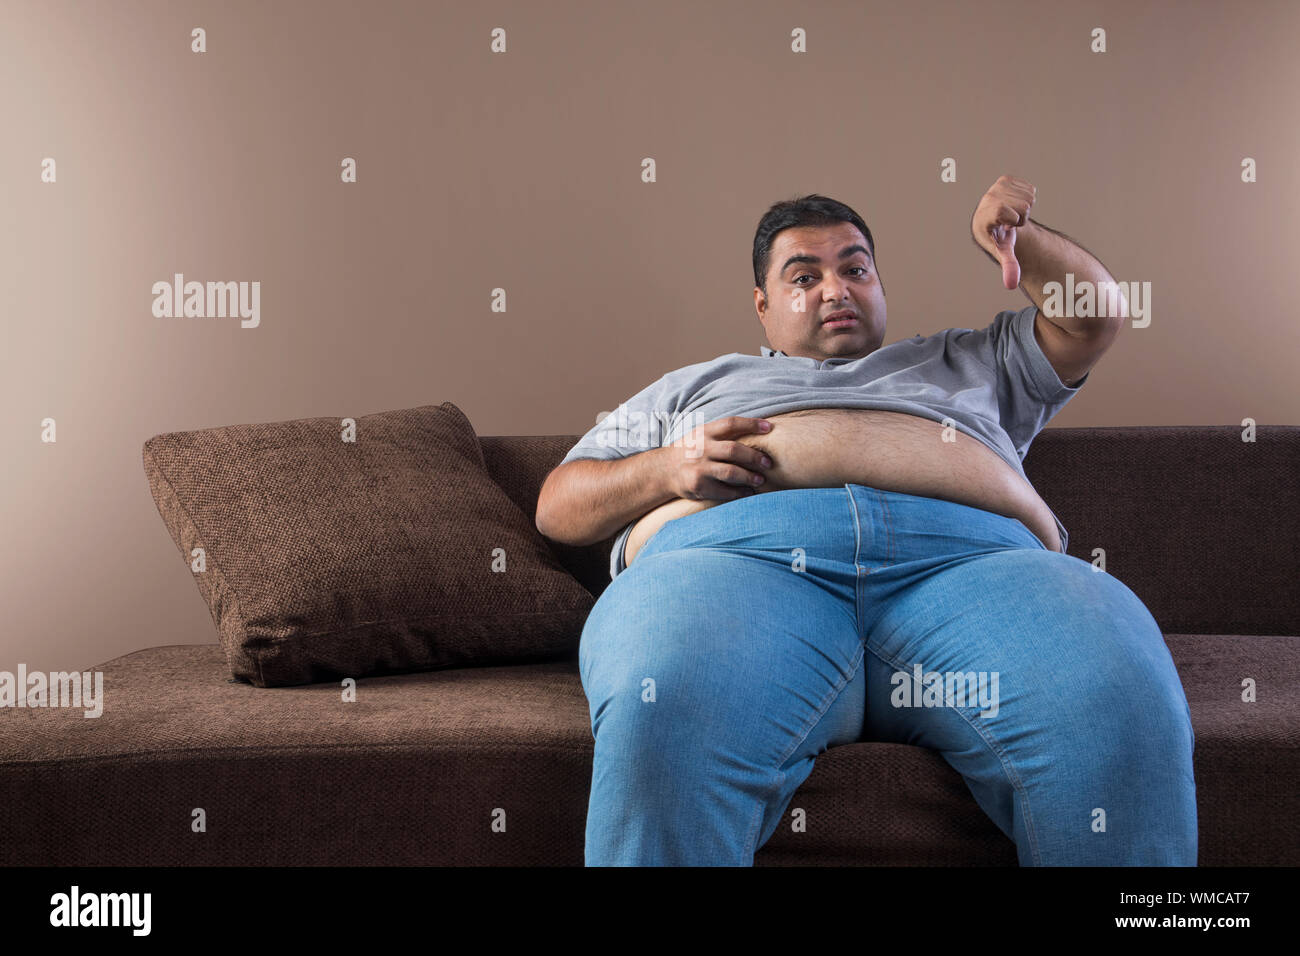 Unhappy obese man sitting on sofa holding his belly fat with one hand and showing thumbs down sign with other Stock Photo